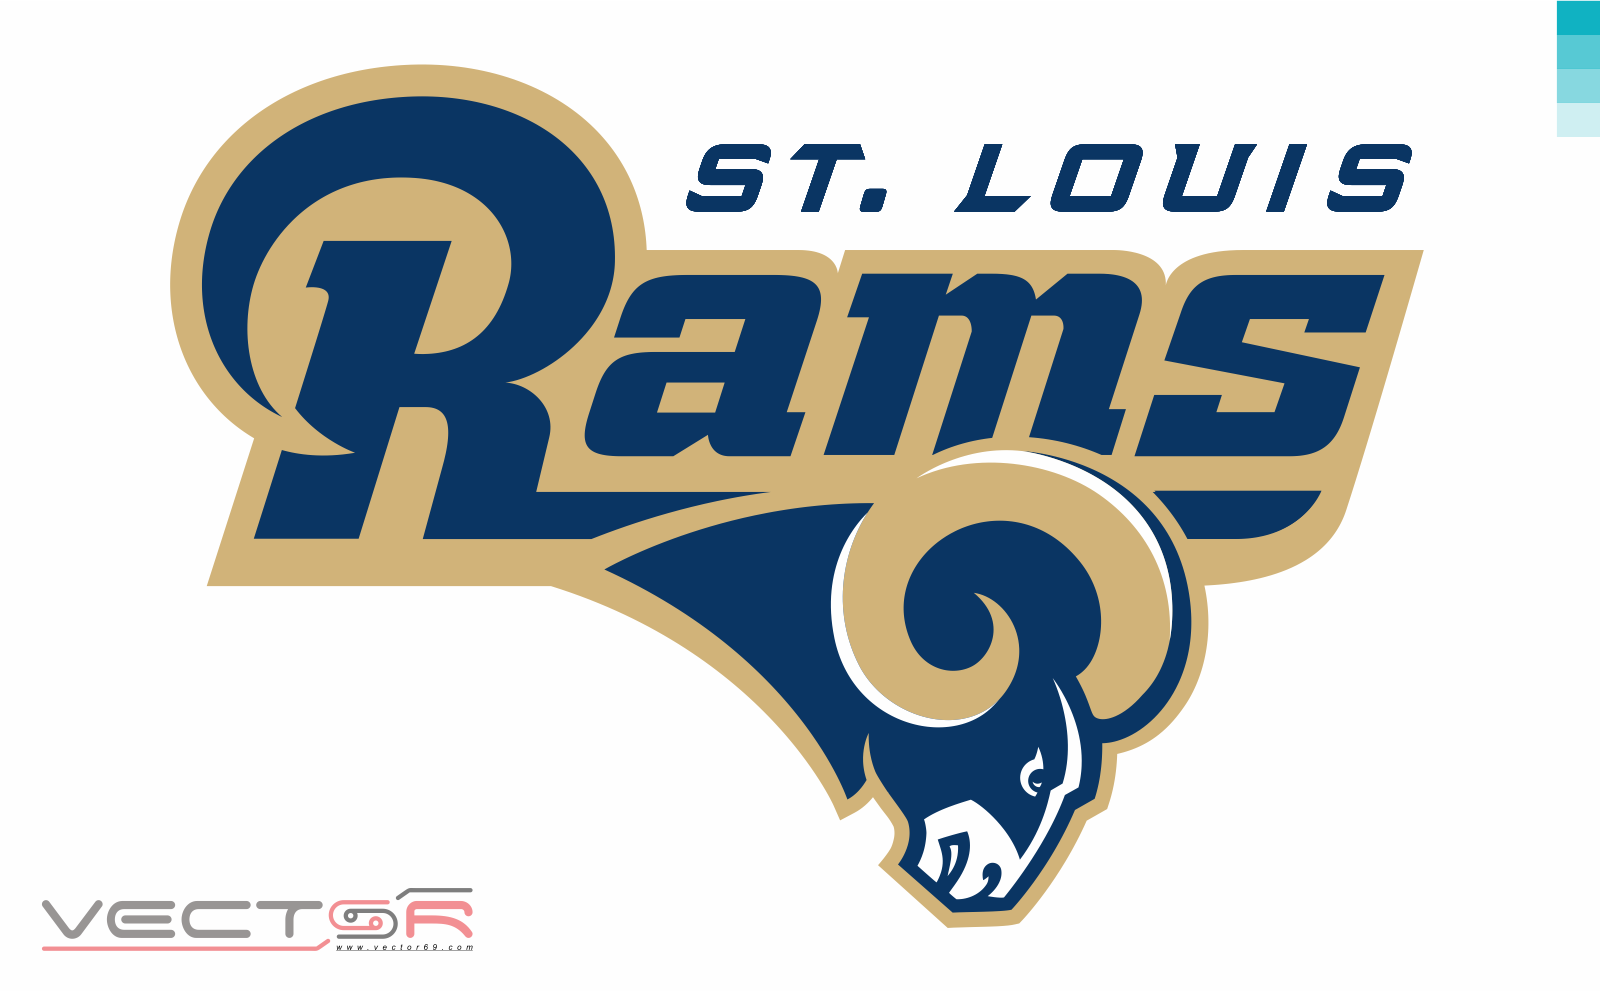 St. Louis Rams (2012-2015) Alternate Logo - Download Vector File SVG (Scalable Vector Graphics)